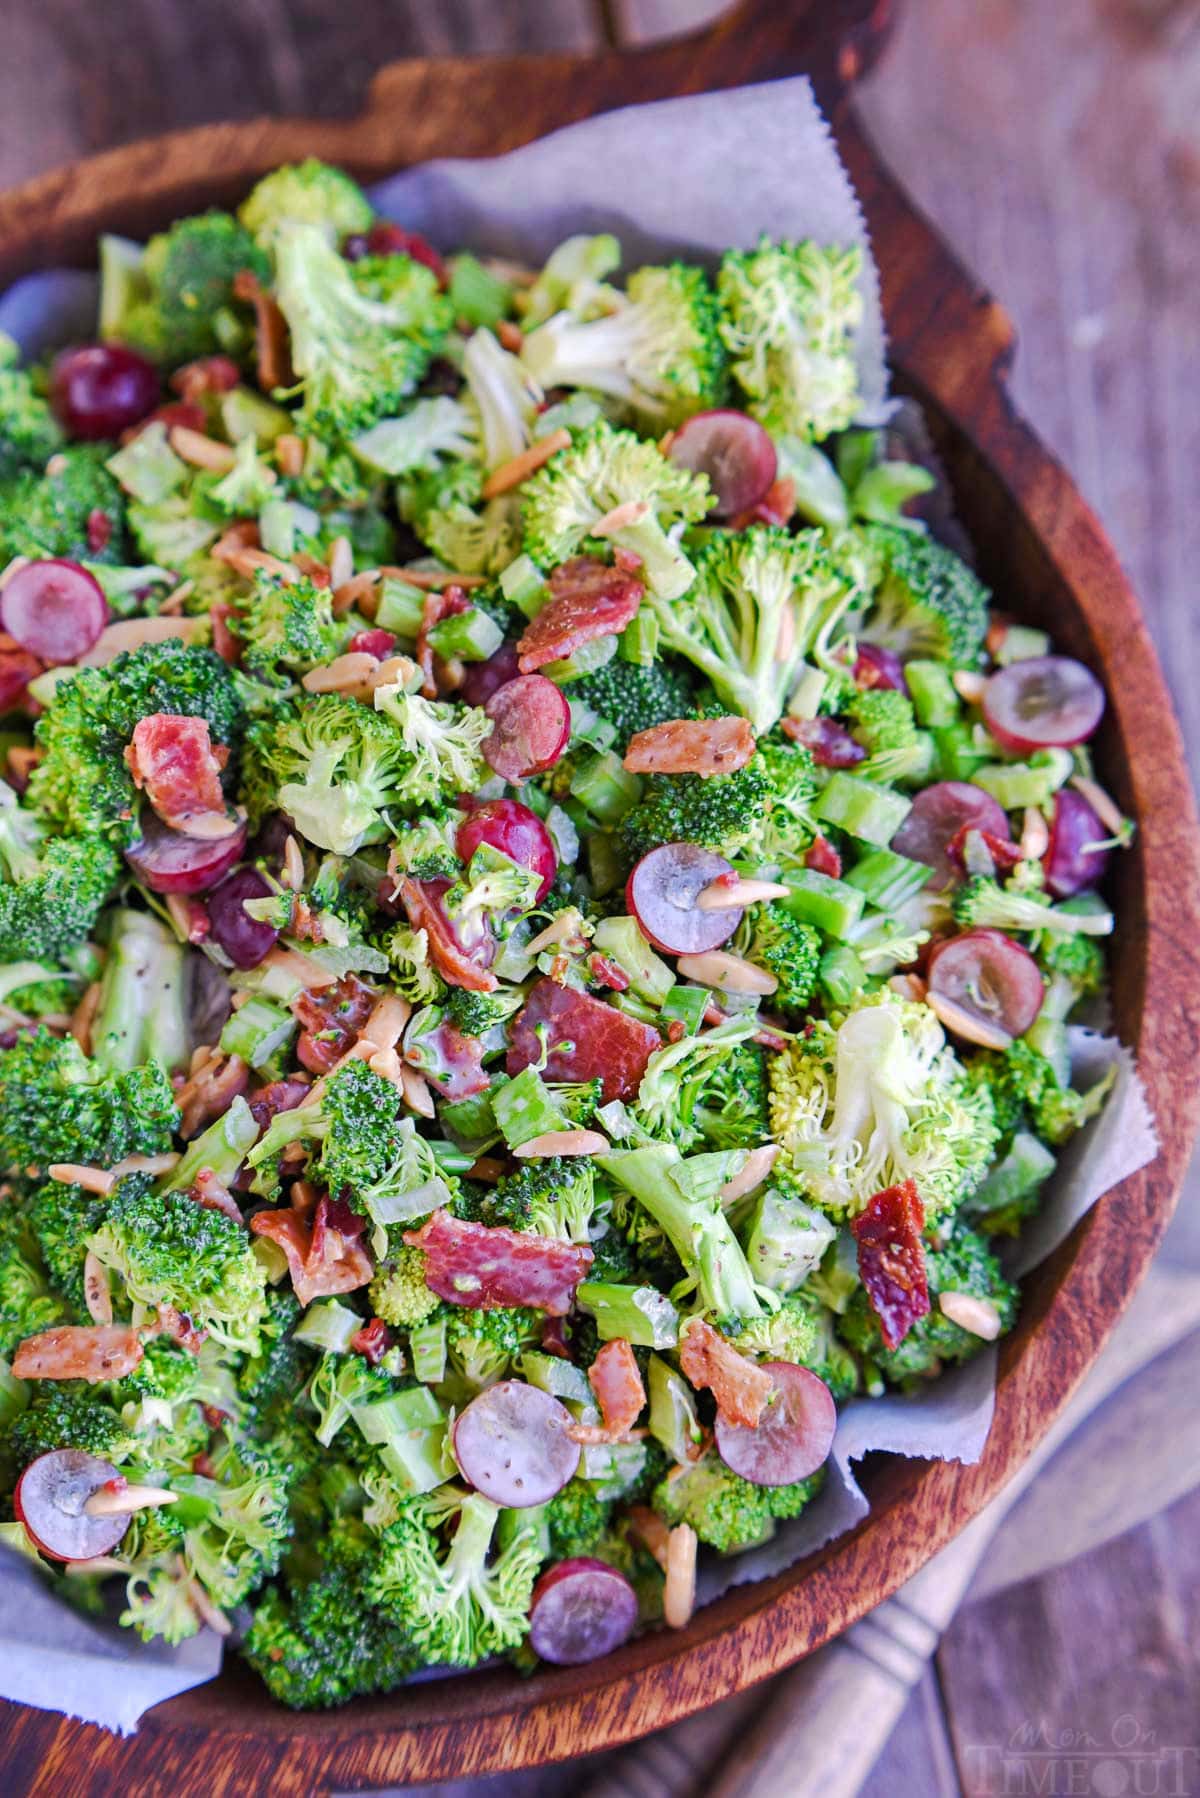 top down view of broccoli salad with bacon in a large wood bowl. Red grapes and toasted almonds can be seen tossed in the salad.